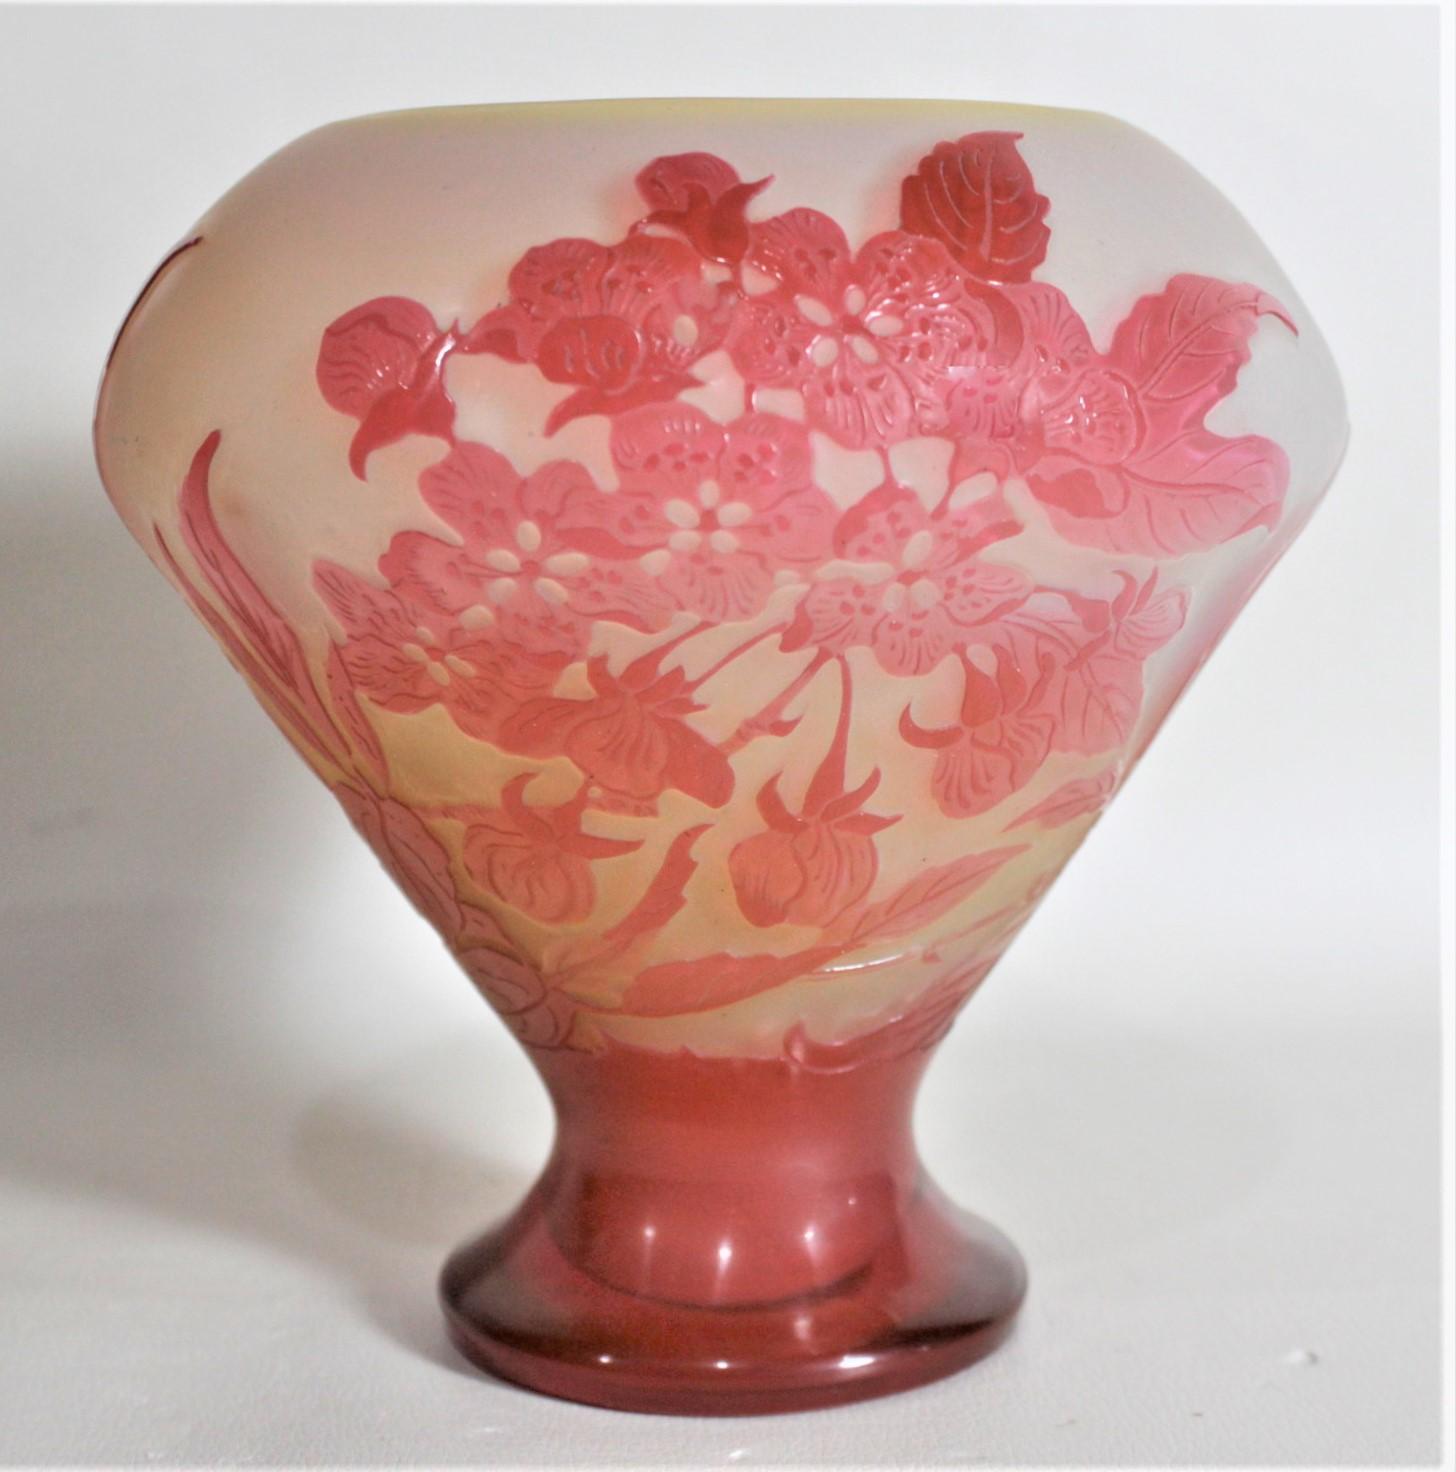 French Emile Galle Cameo Art Glass Cabinet Vase with Exotic Floral and Leaf Decoration